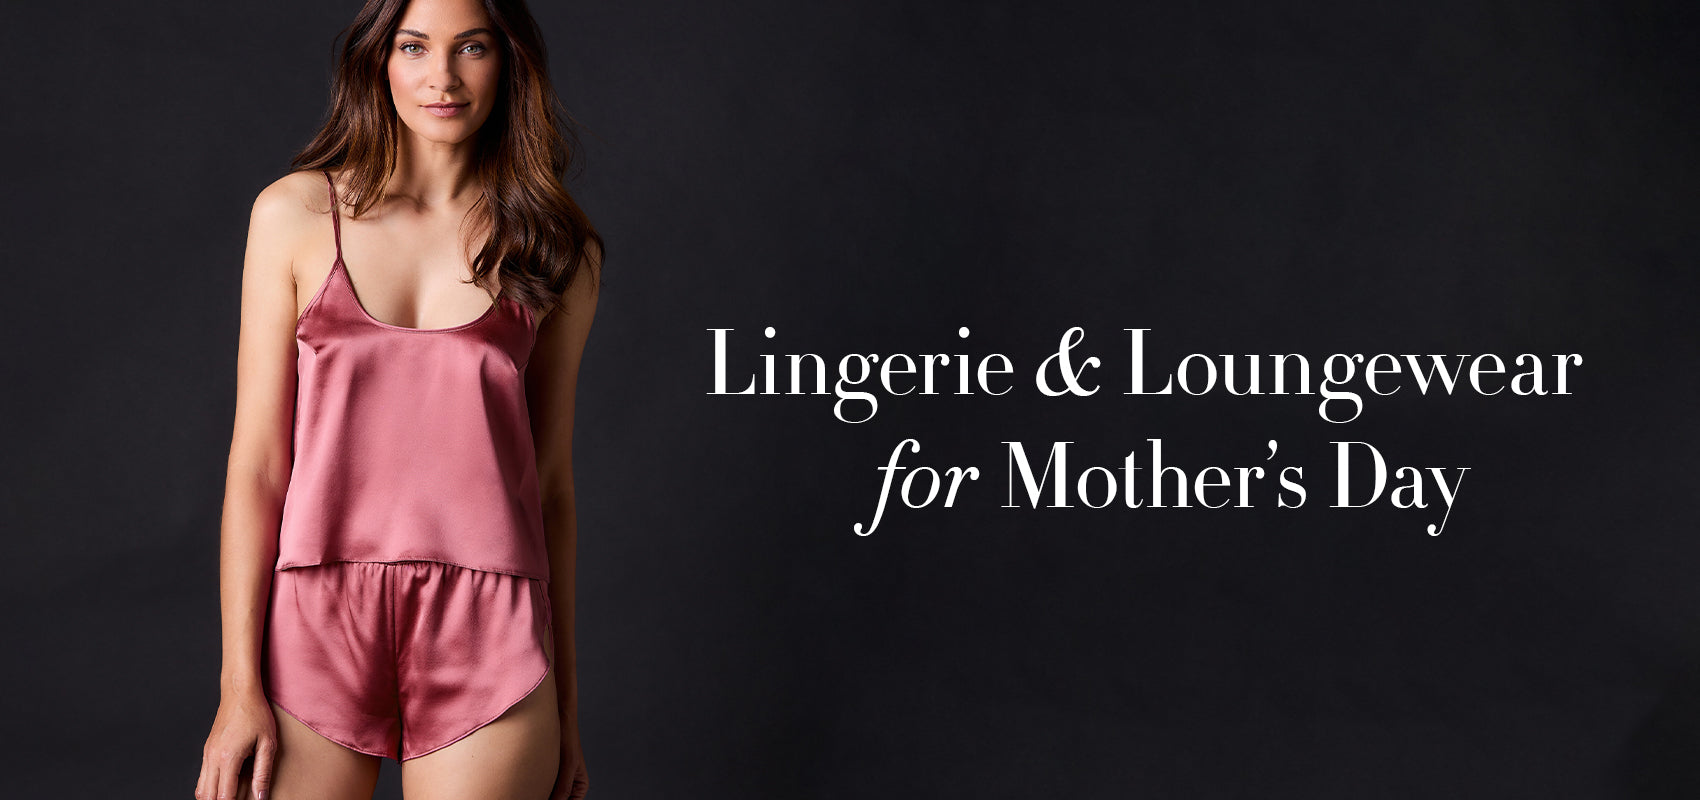 Lingerie and Loungewear for Mother's Day